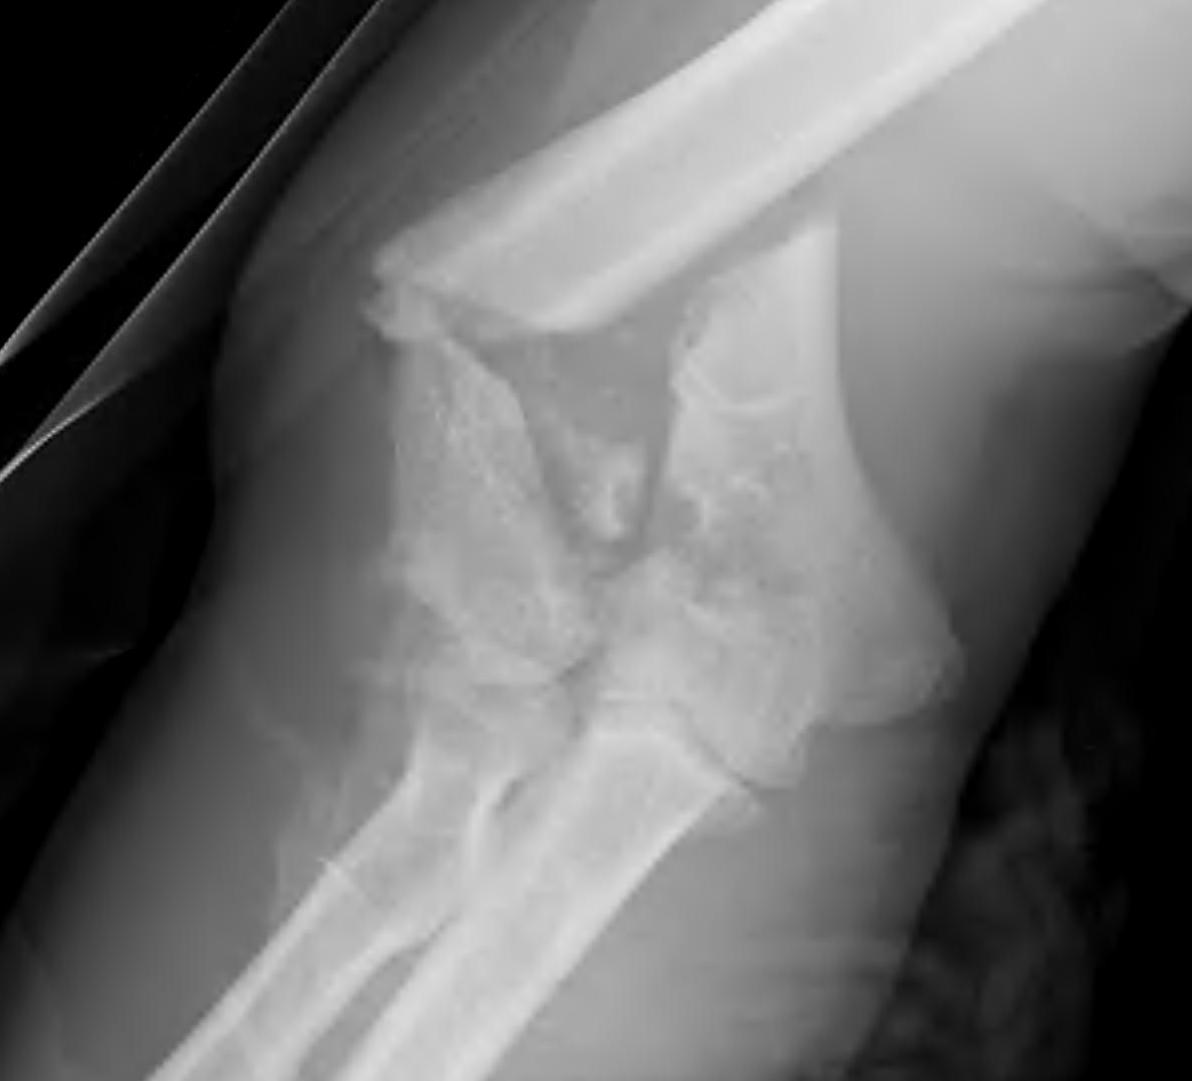 Distal Humeral Fracture